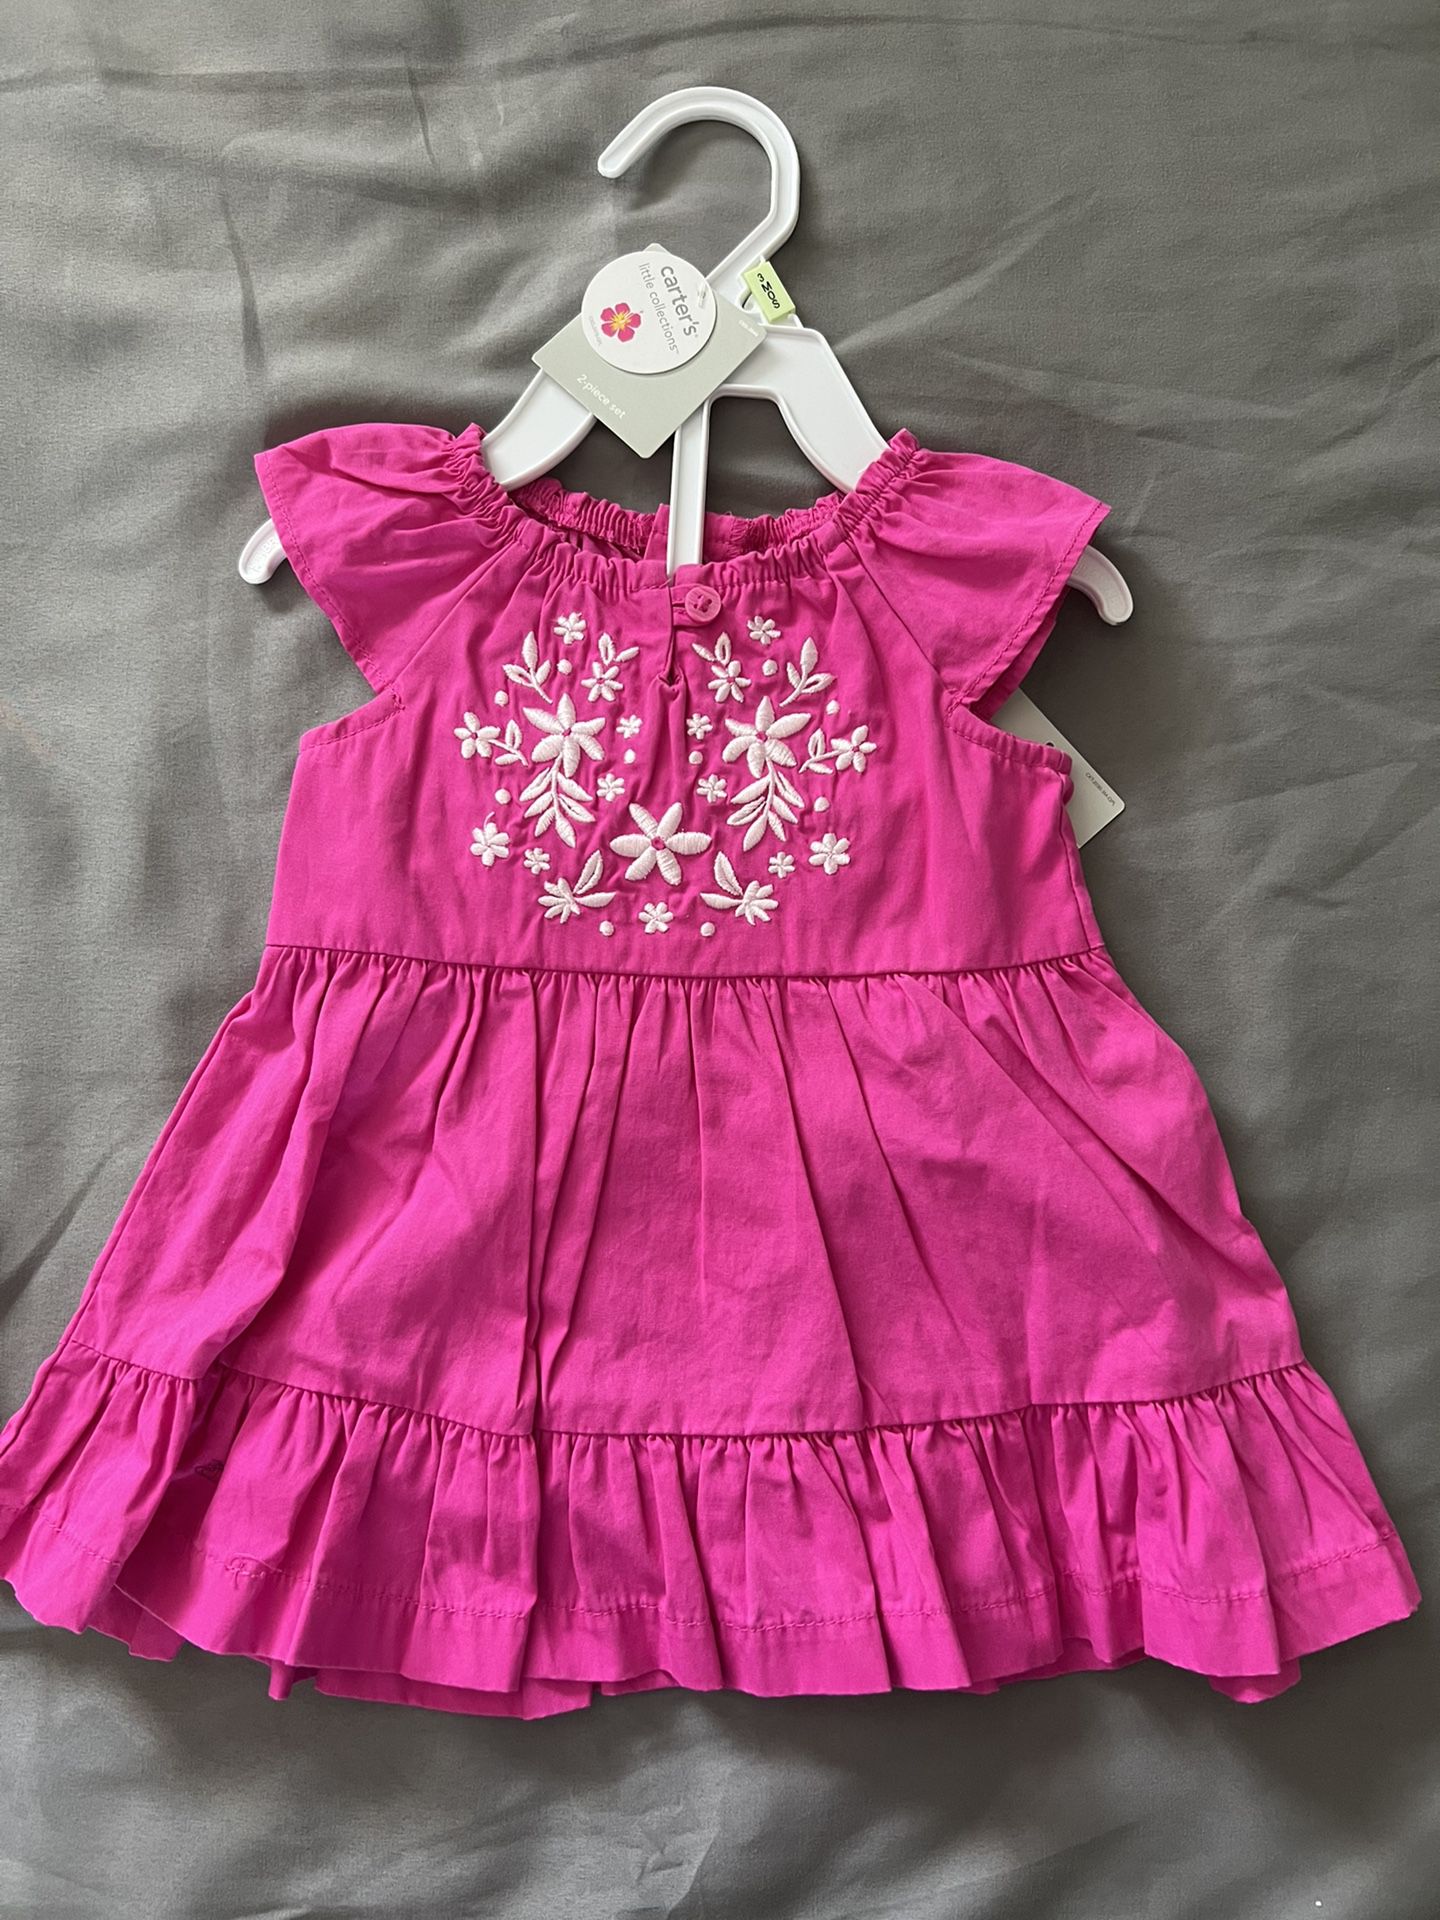 Pink Carters Baby Dress 6M